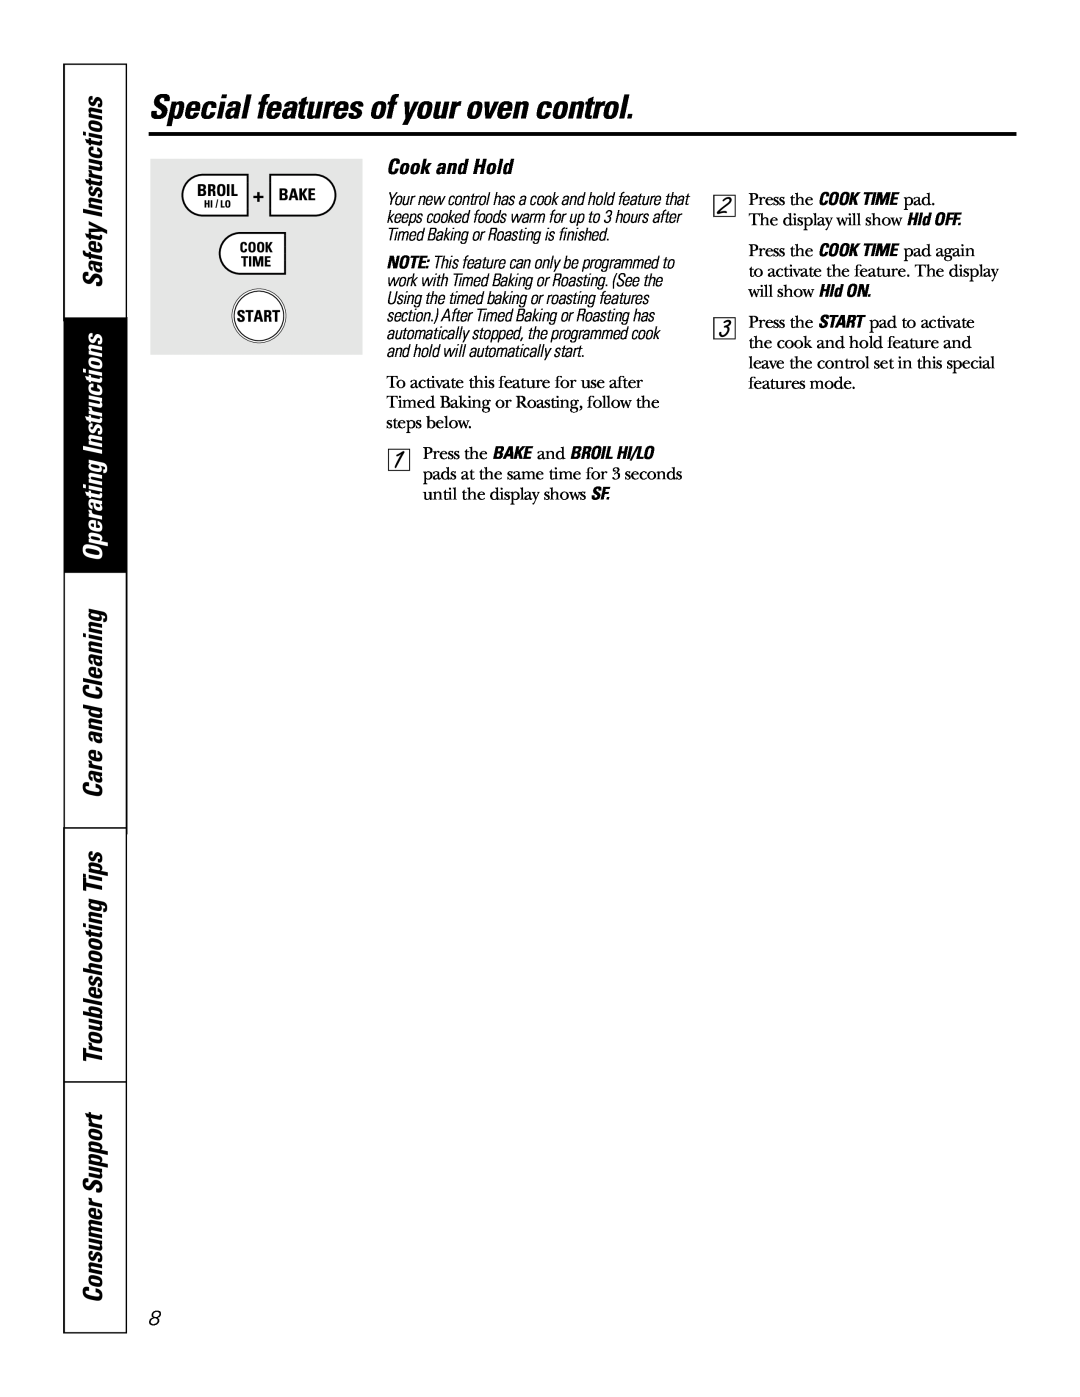 GE JT95230, JT91230 owner manual Instructions, Cook and Hold, Special features of your oven control 